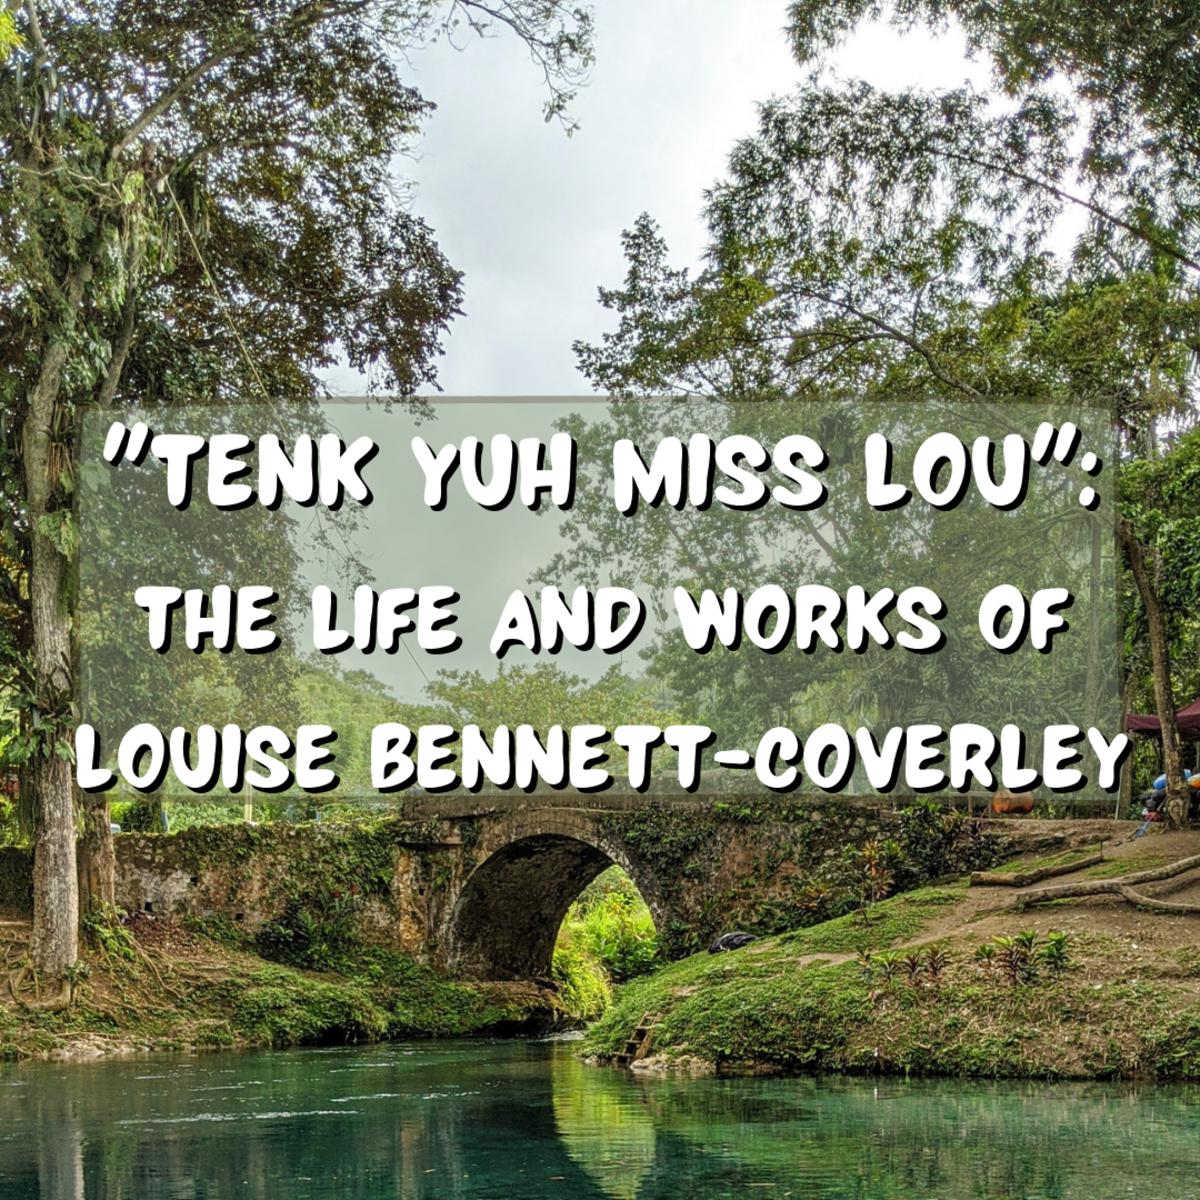 The Life and Works of Louise Bennett-Coverley